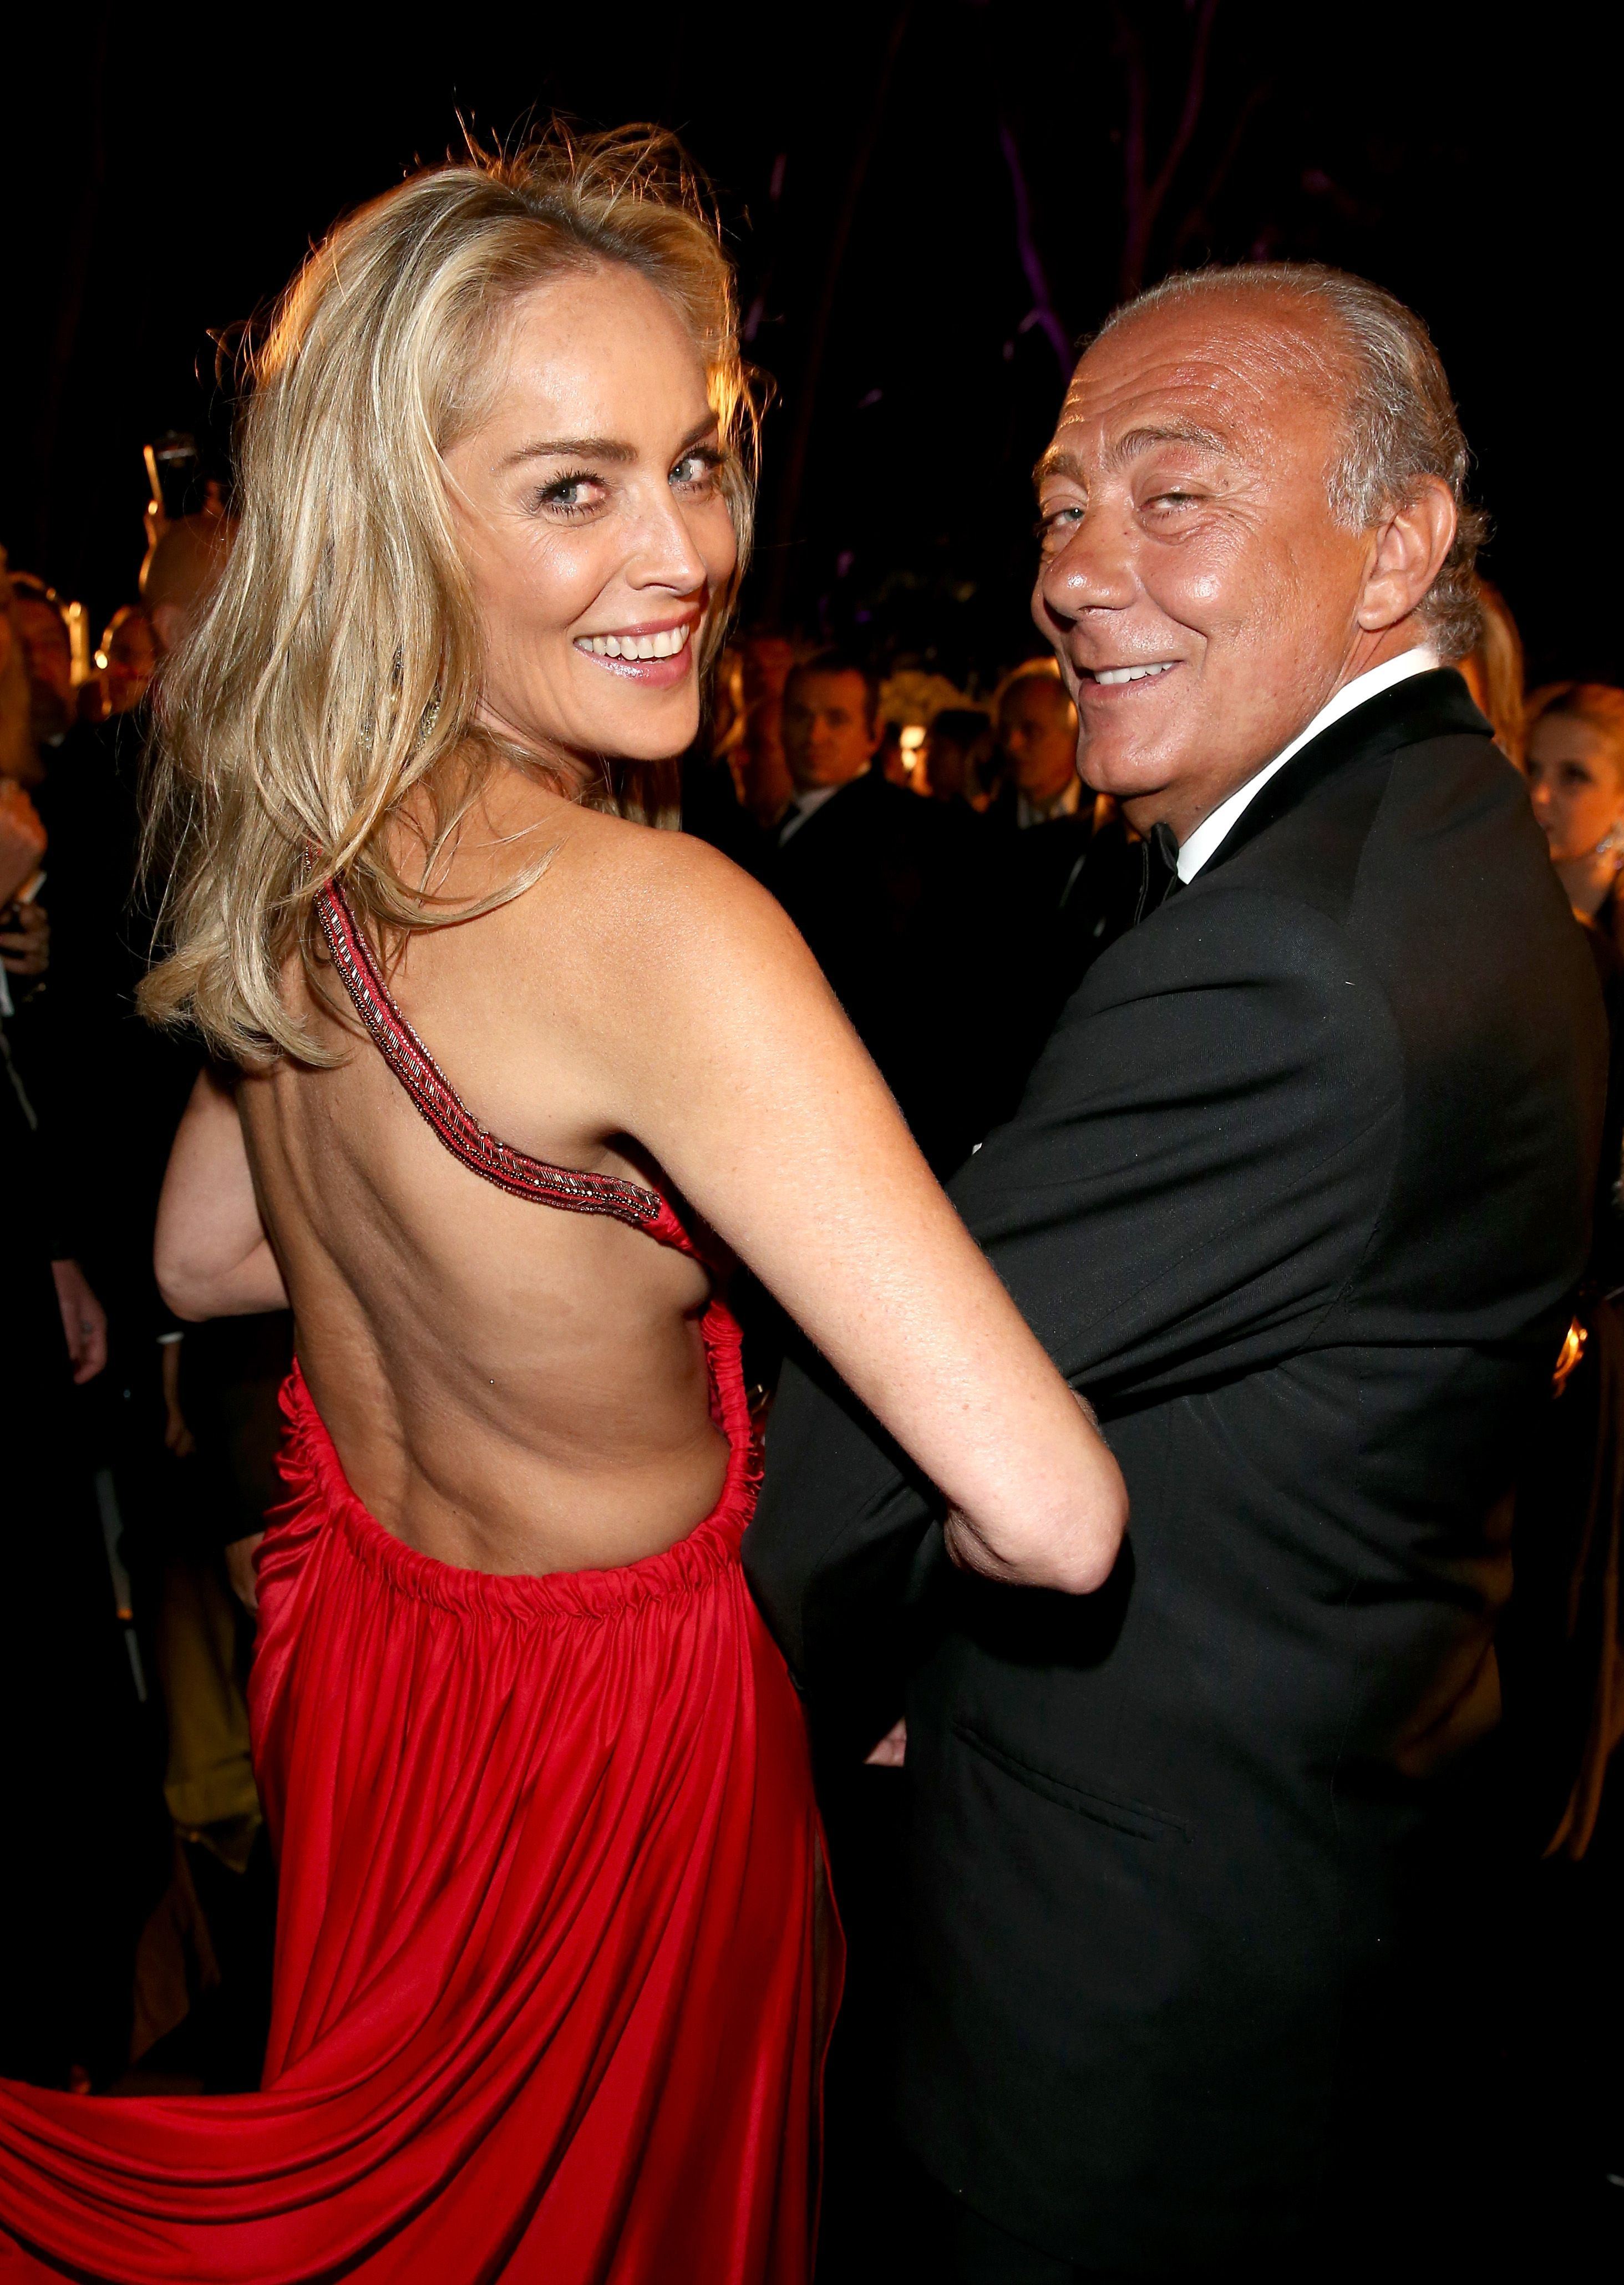 Sharon stone upskirt at cannes